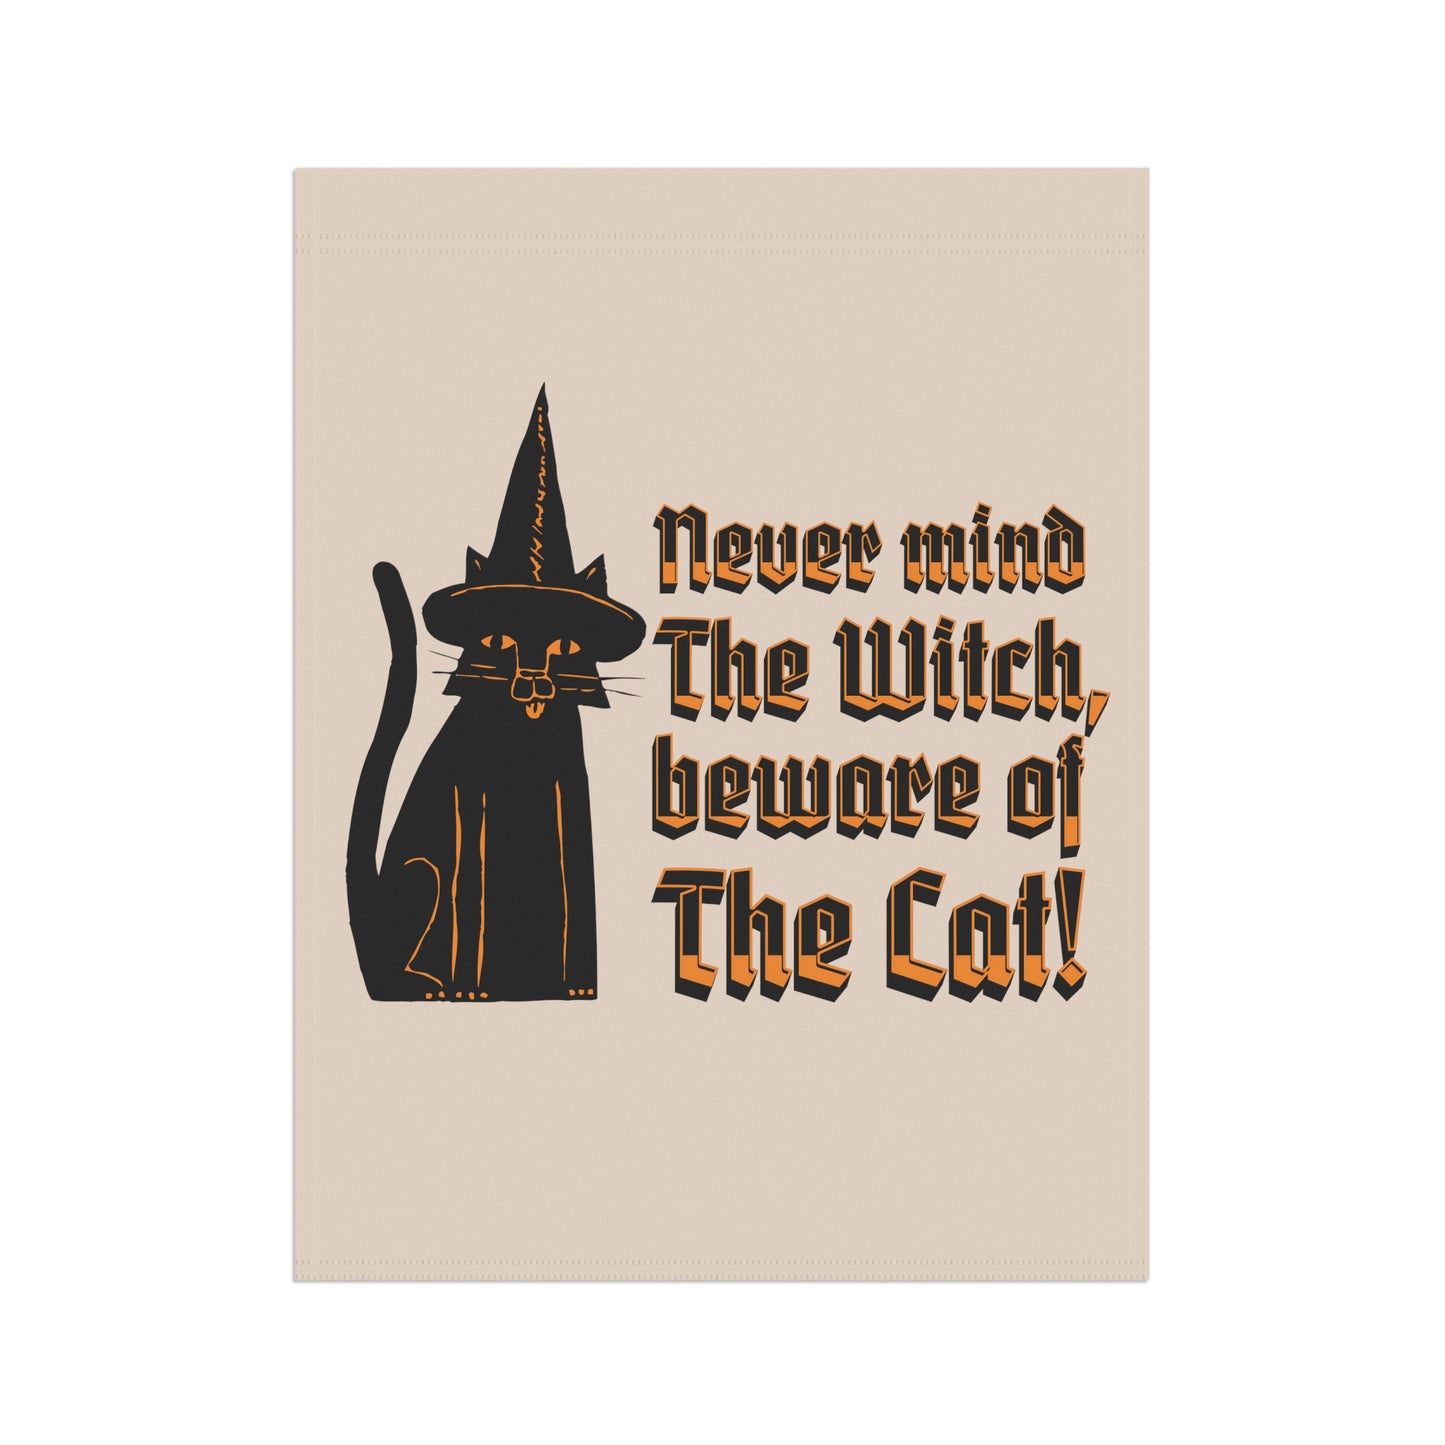 Witchy black cat Garden & House Banner, Cat Halloween Banner, Spooky Season Banner, Black Cat Familiar home decor, Halloween accessory